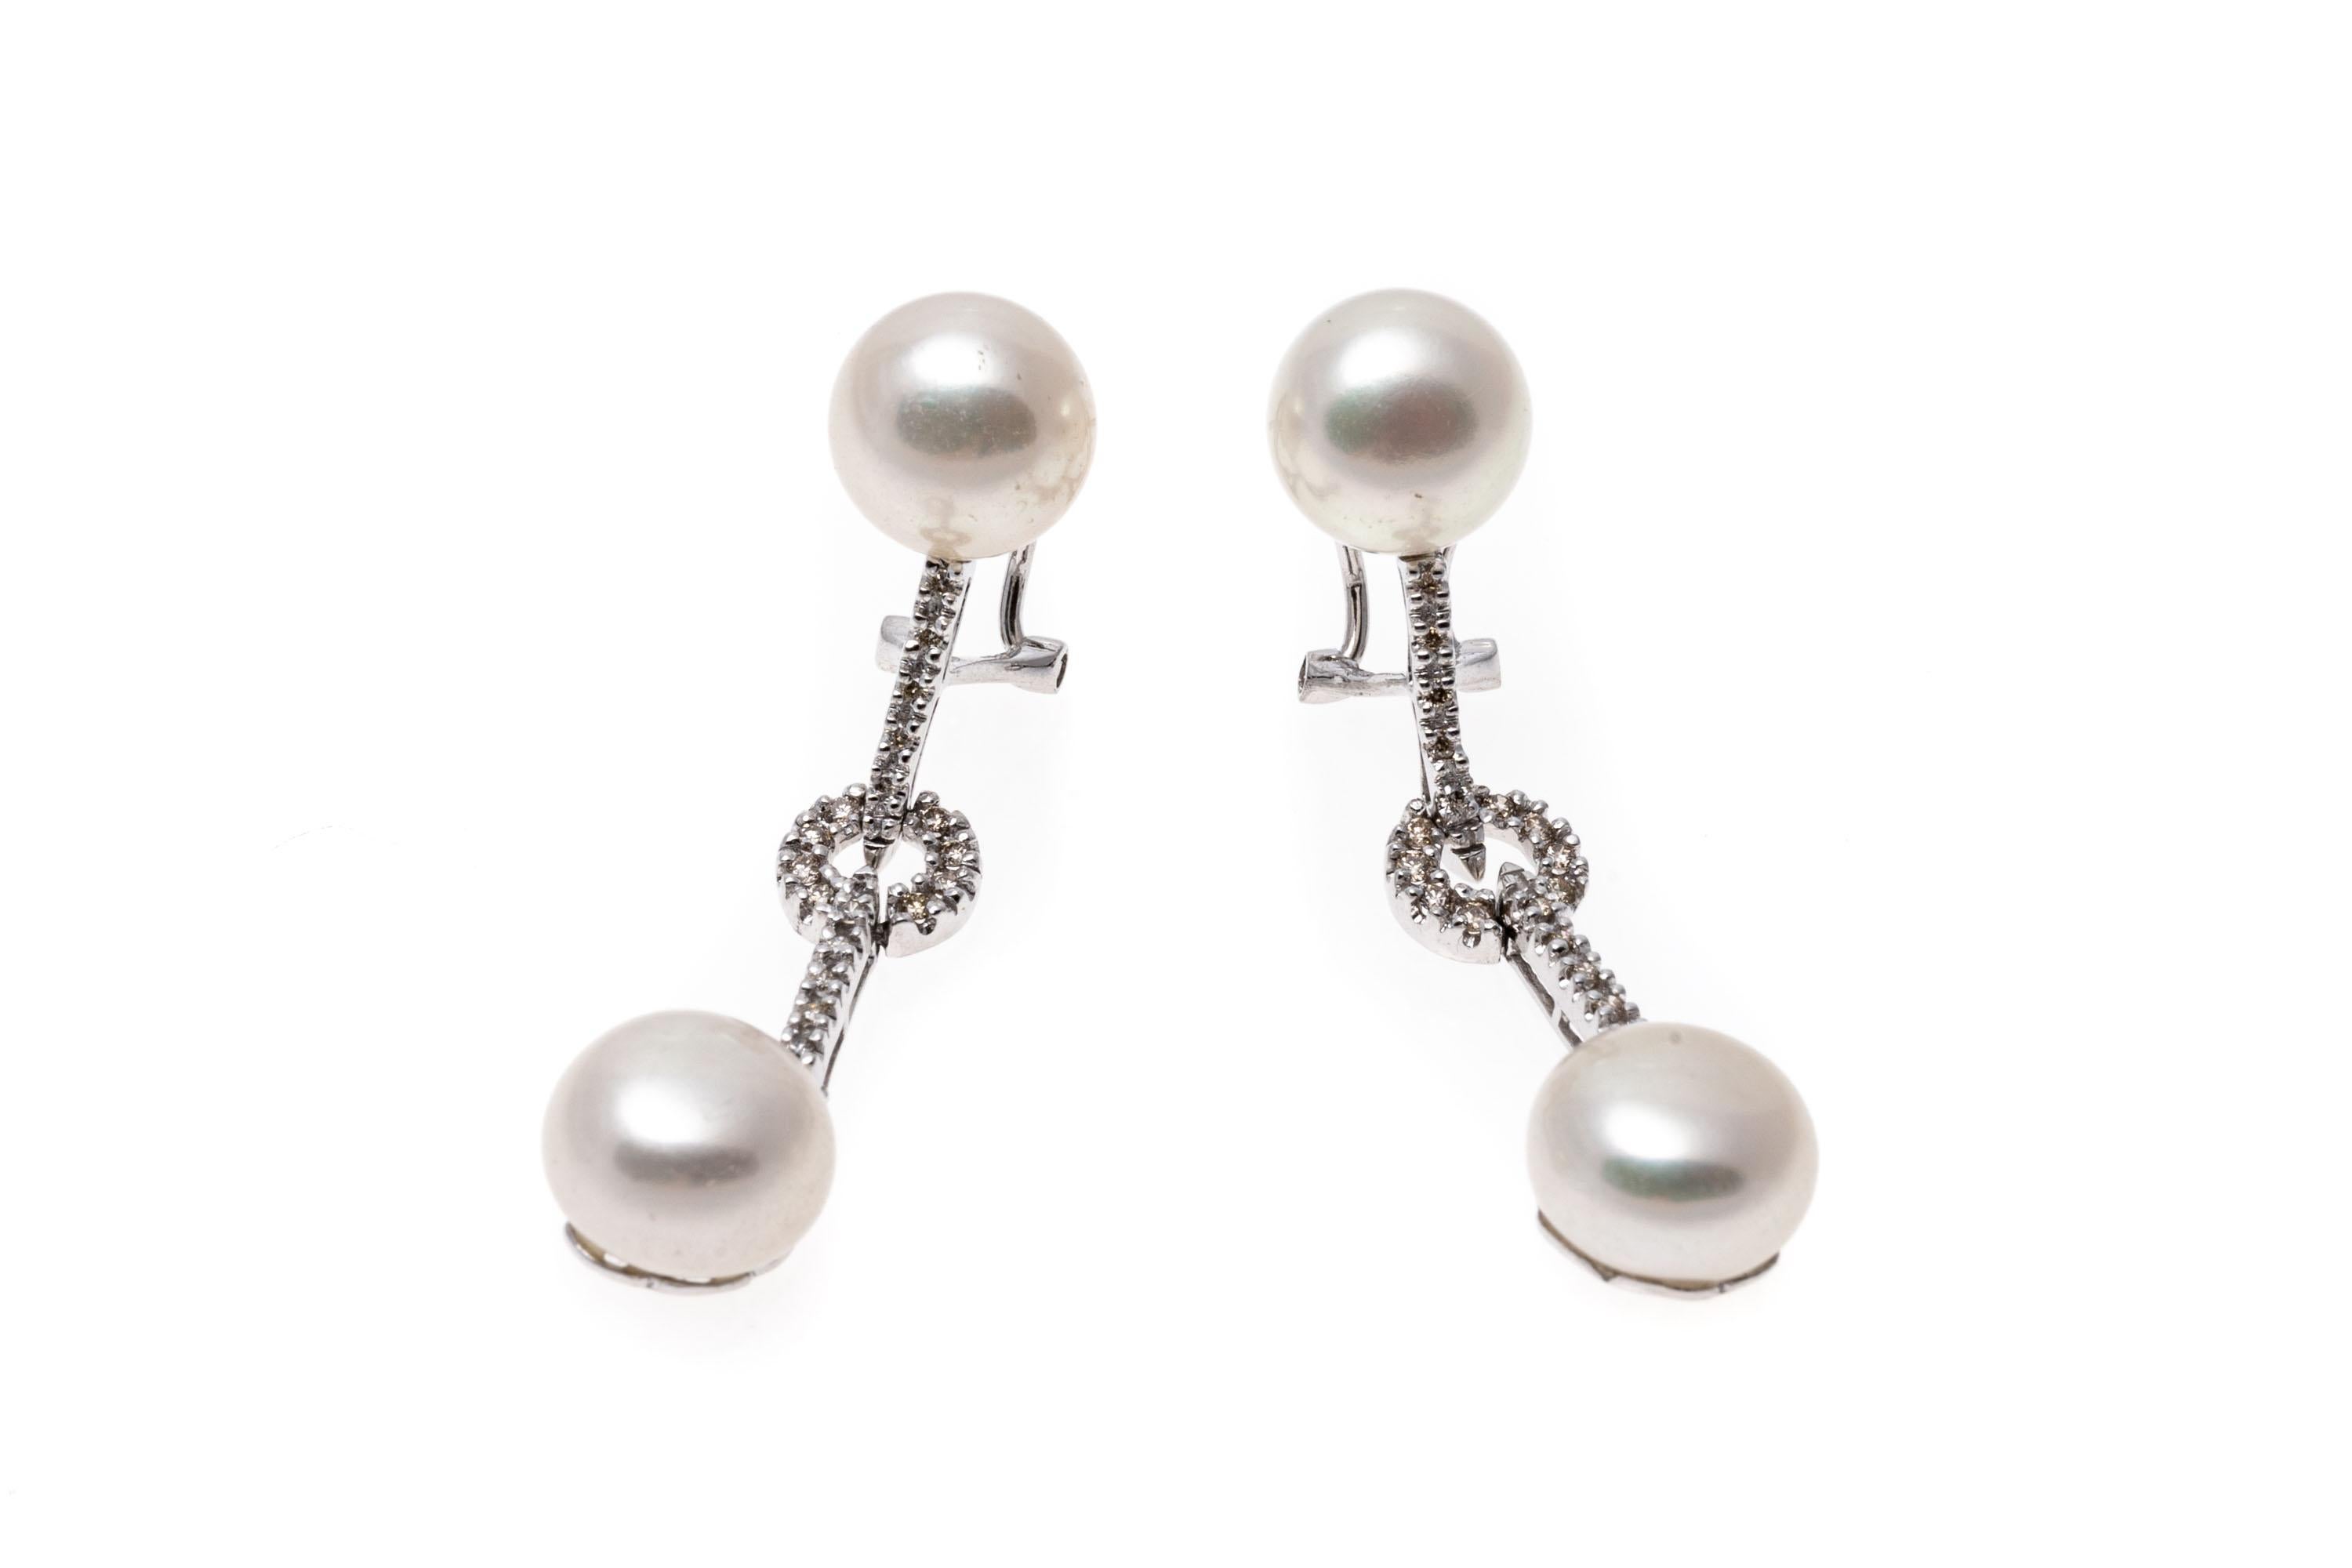 Set with bright white cultured freshwater pearls and diamonds these 14K white gold drop style earrings have an elegant presence. The pearls are approximately 9.0mm and have pink overtones. The diamonds are approximately 0.15 TCW. Post and omega